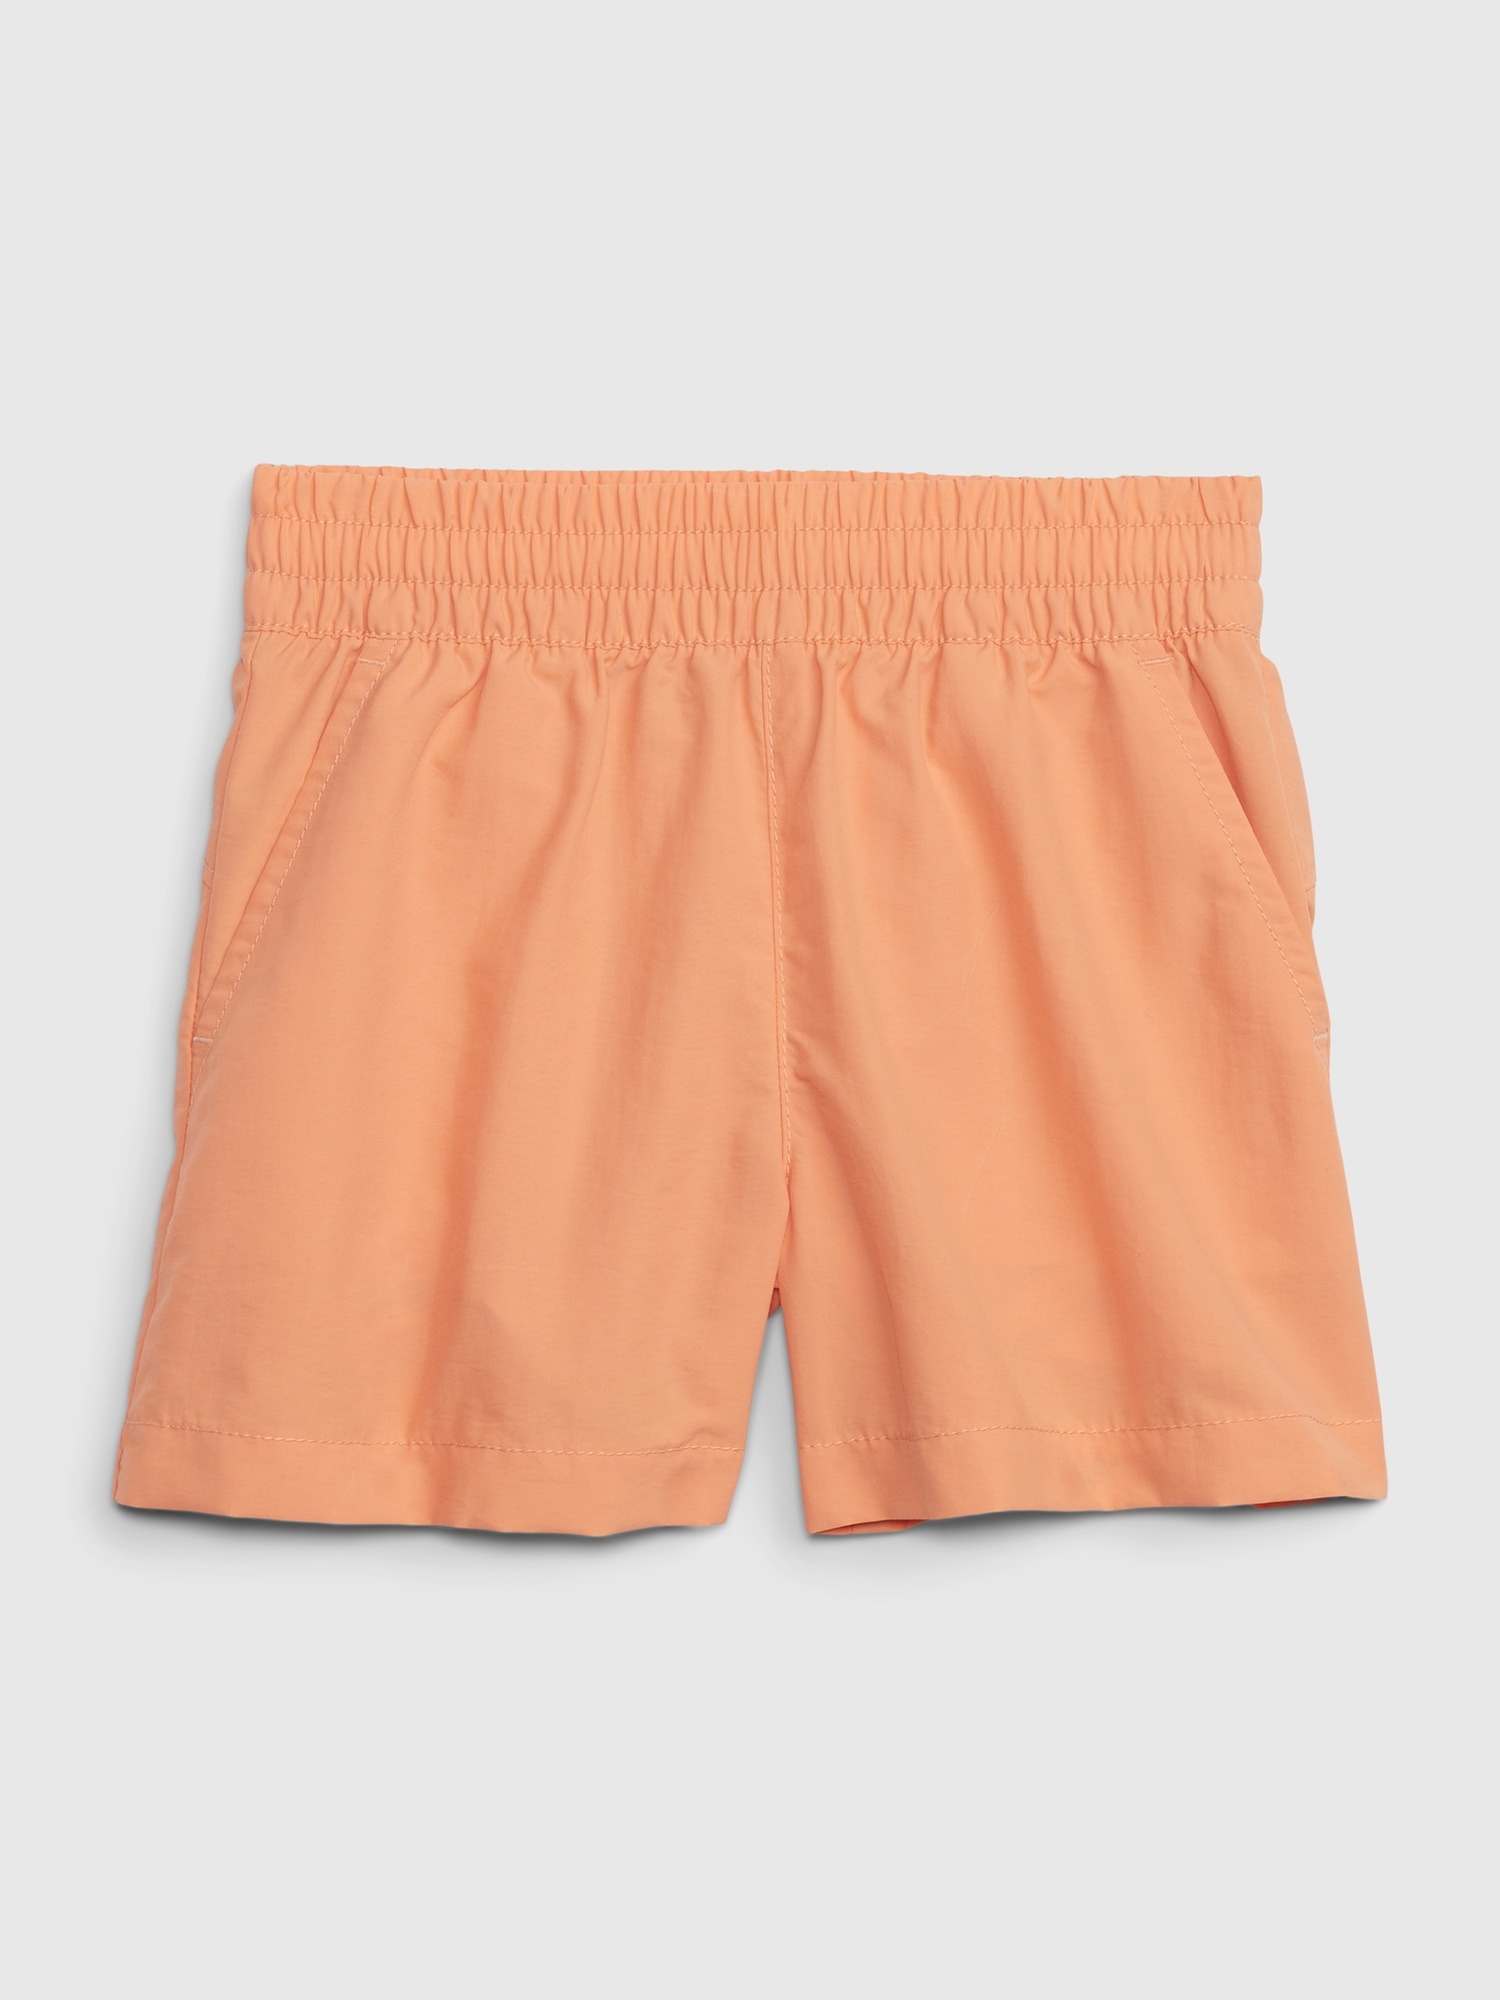 Gap Fit Toddler Fit Tech Pull-On Shorts orange. 1